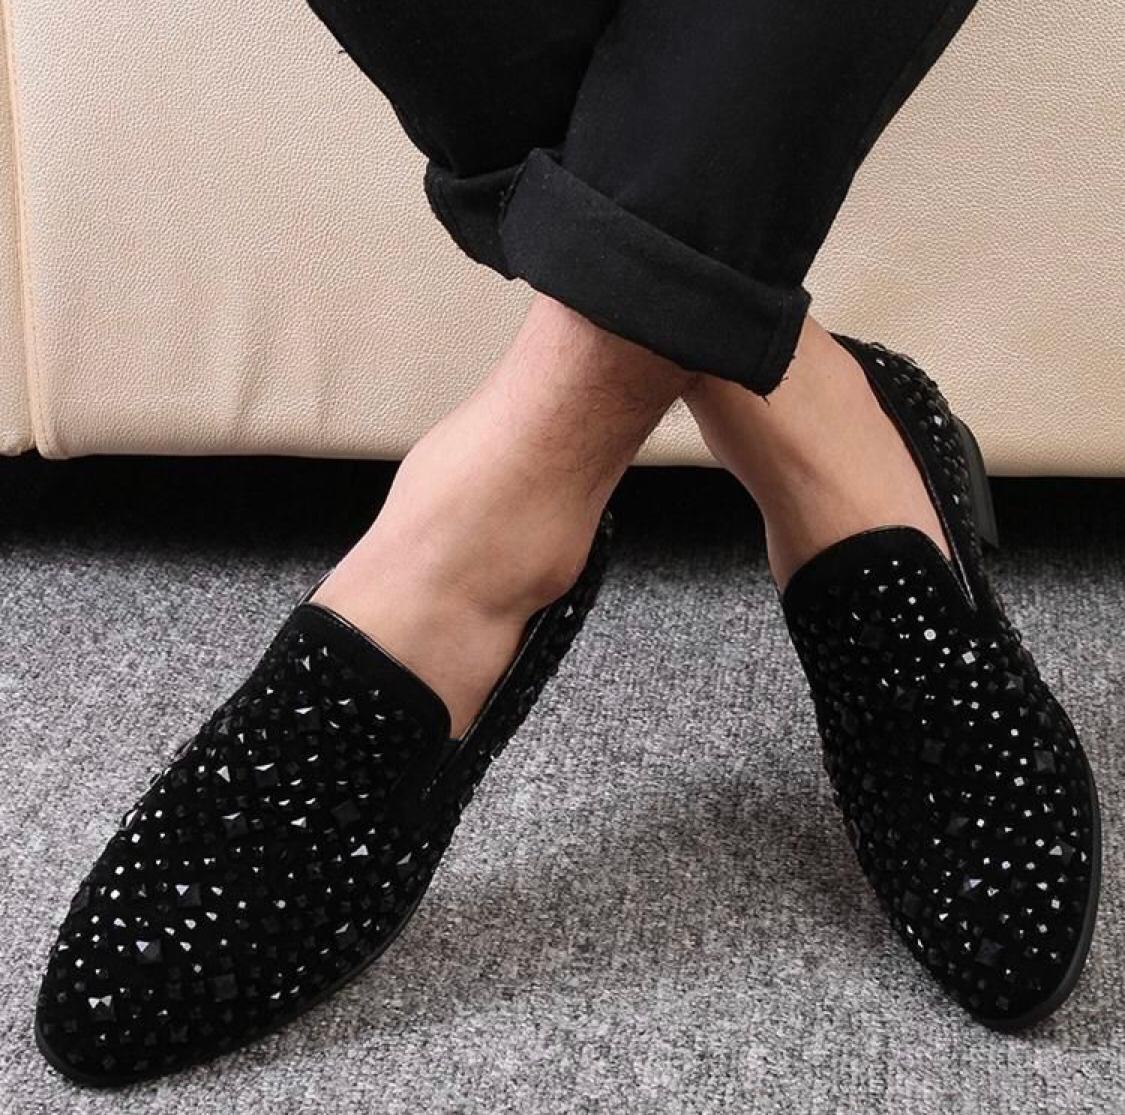 Stylish Studded Moccasins Men's Fashion Wedding Revert High Quality Slip On Flat Loafer-Unique and Classy  -Unique and Classy